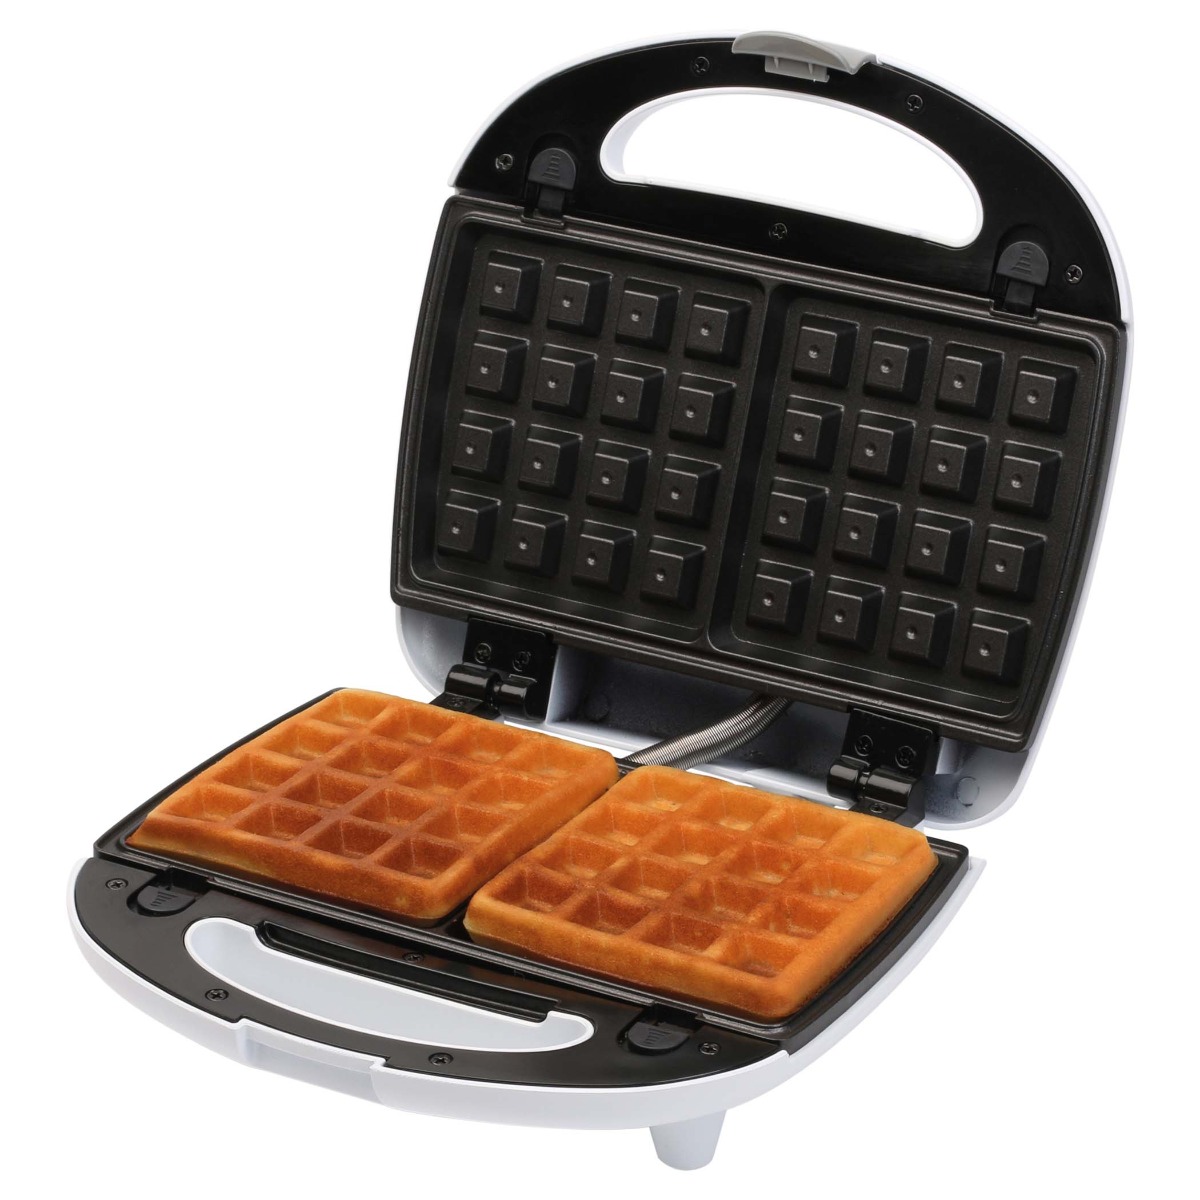 Sencor Sandwich Maker,  4 triangular sandwiches, grilled meat or waffles, 3 removable plates, 700 W, White - SSM 9300